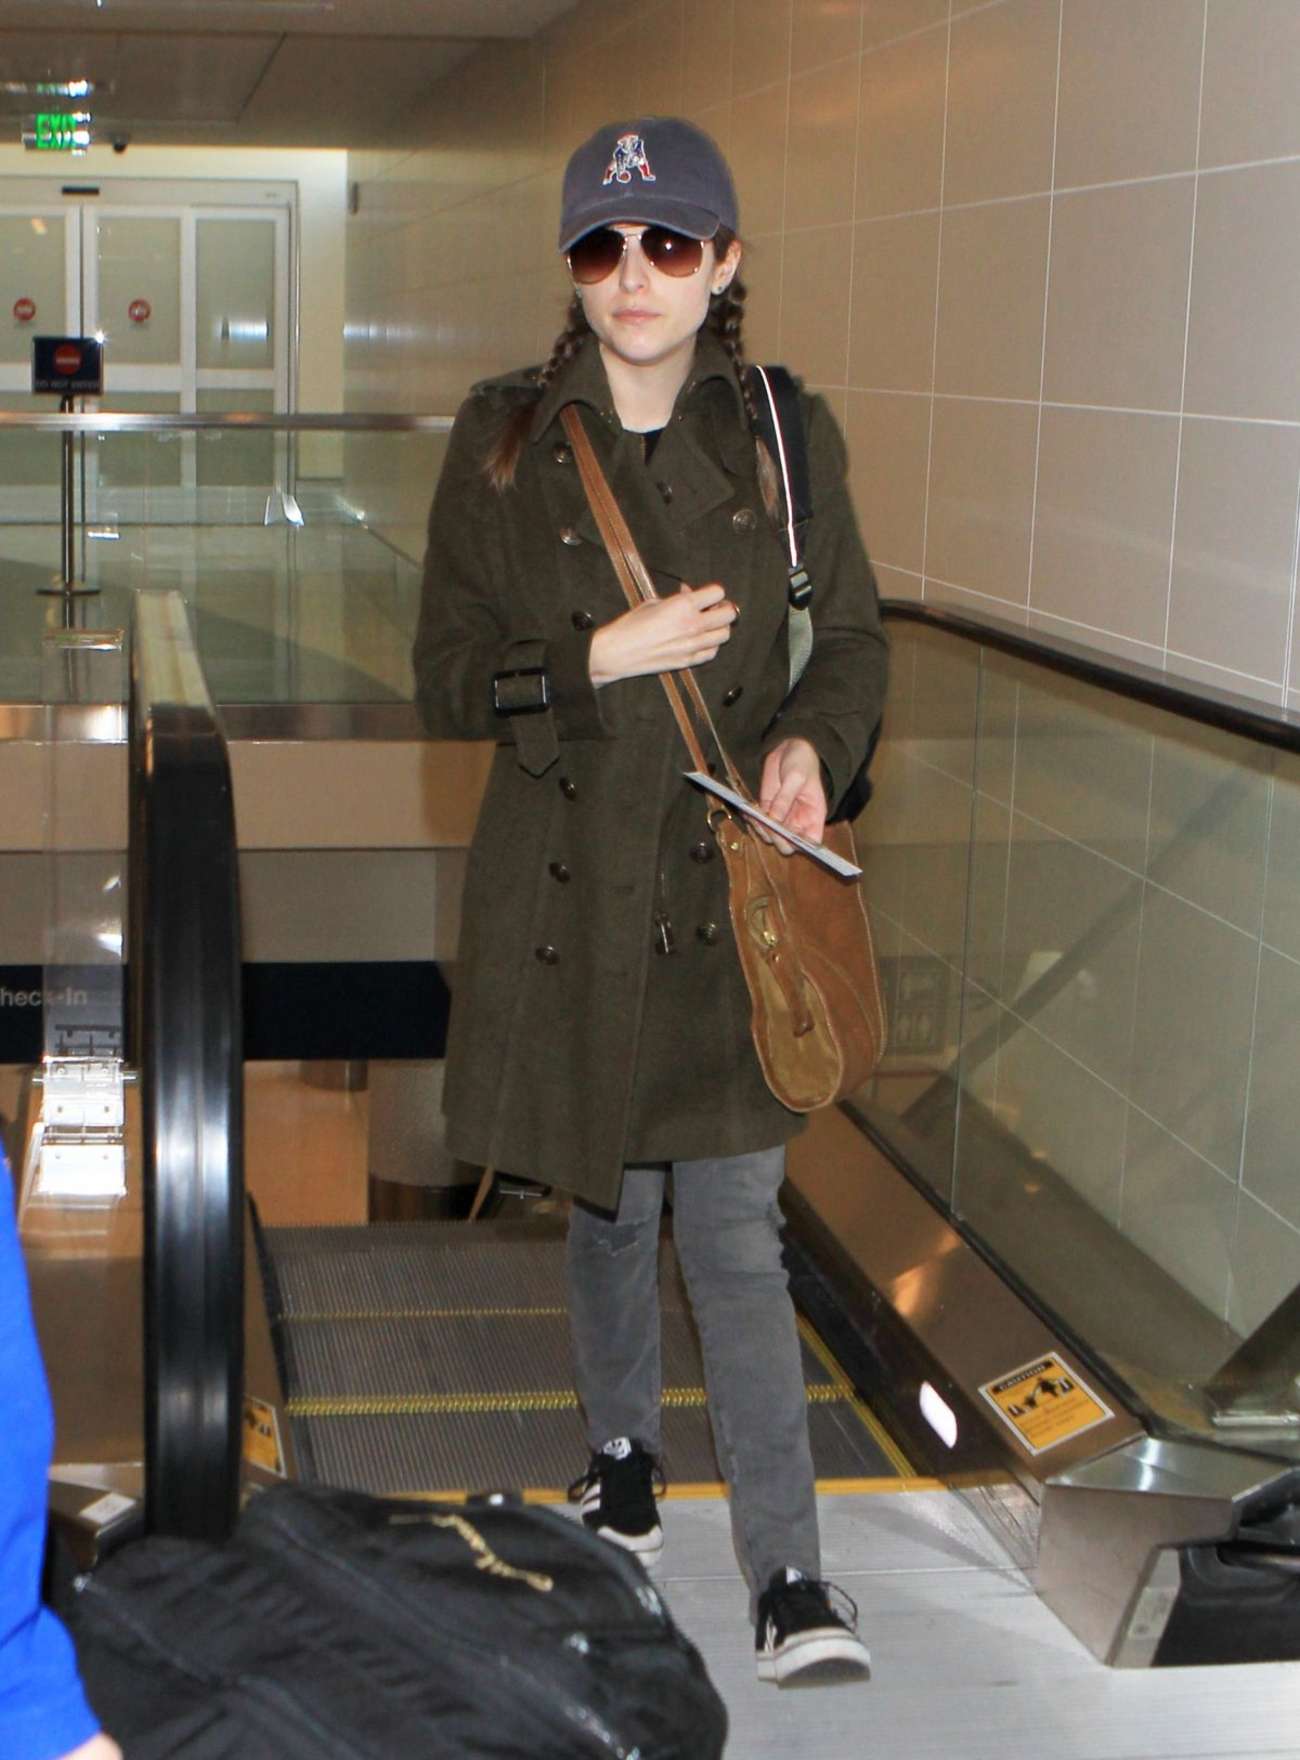 Anna Kendrick - Arrives at LAX Airport in Los Angeles